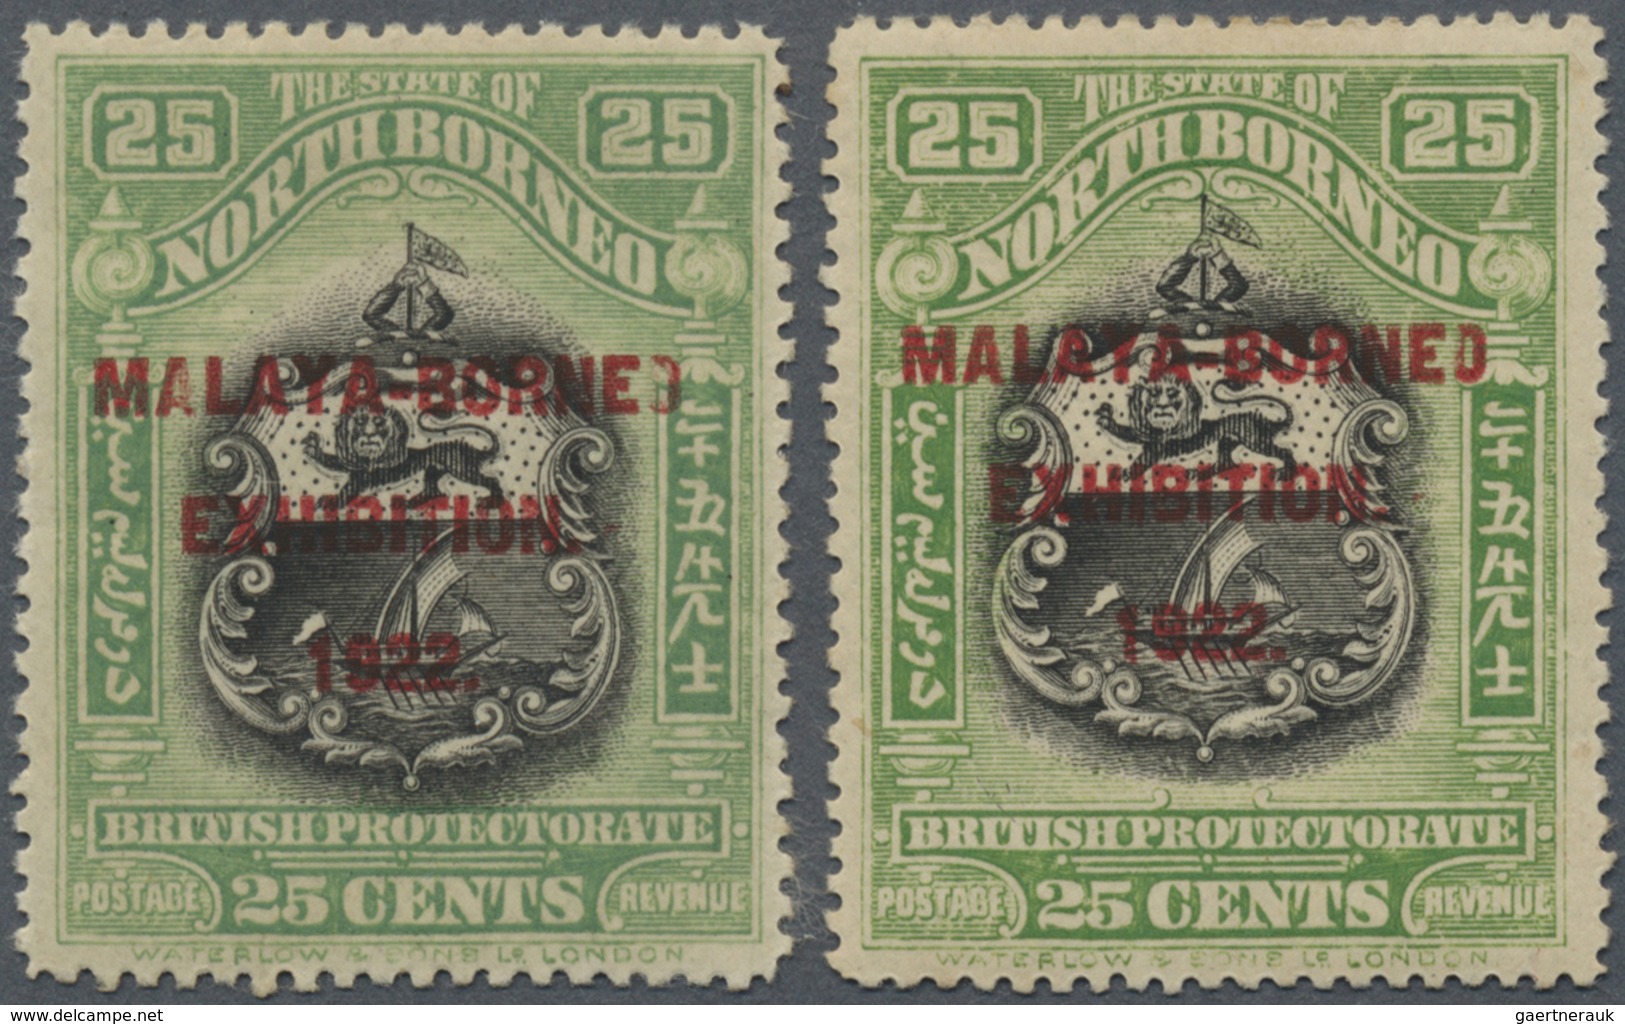 * Nordborneo: 1922, Malaya-Borneo Exhibition 25c. 'Coat Of Arms' With Different Perforations Both With - Noord Borneo (...-1963)